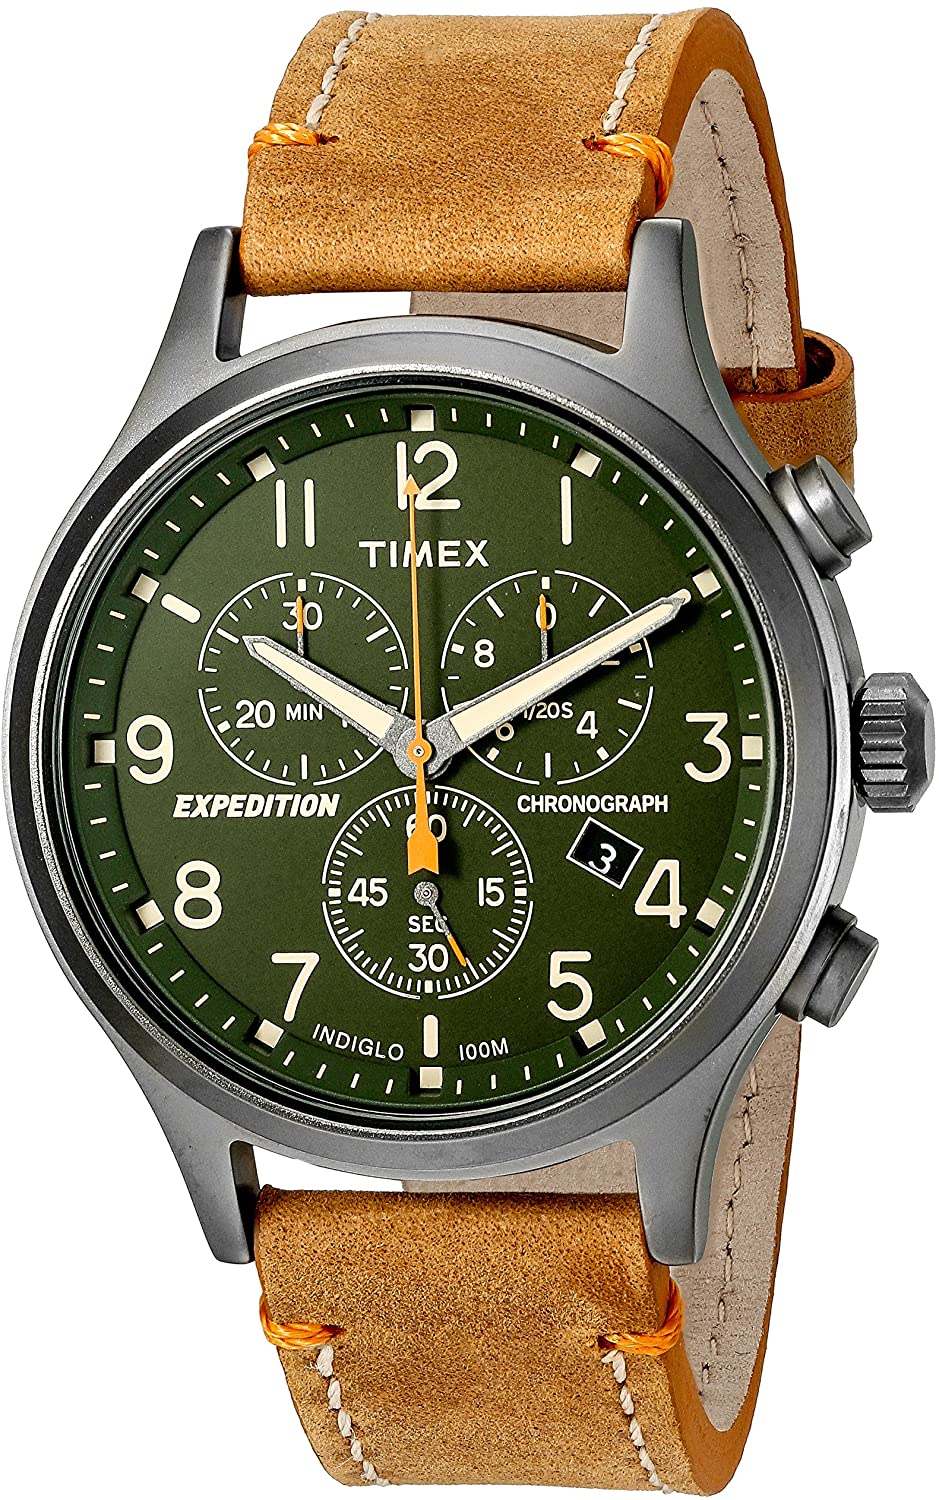 Timex Men's TW4B04200 Expedition Scout Chronograph, Tan/Green Watch with Leather Slip-Thru Strap Watch